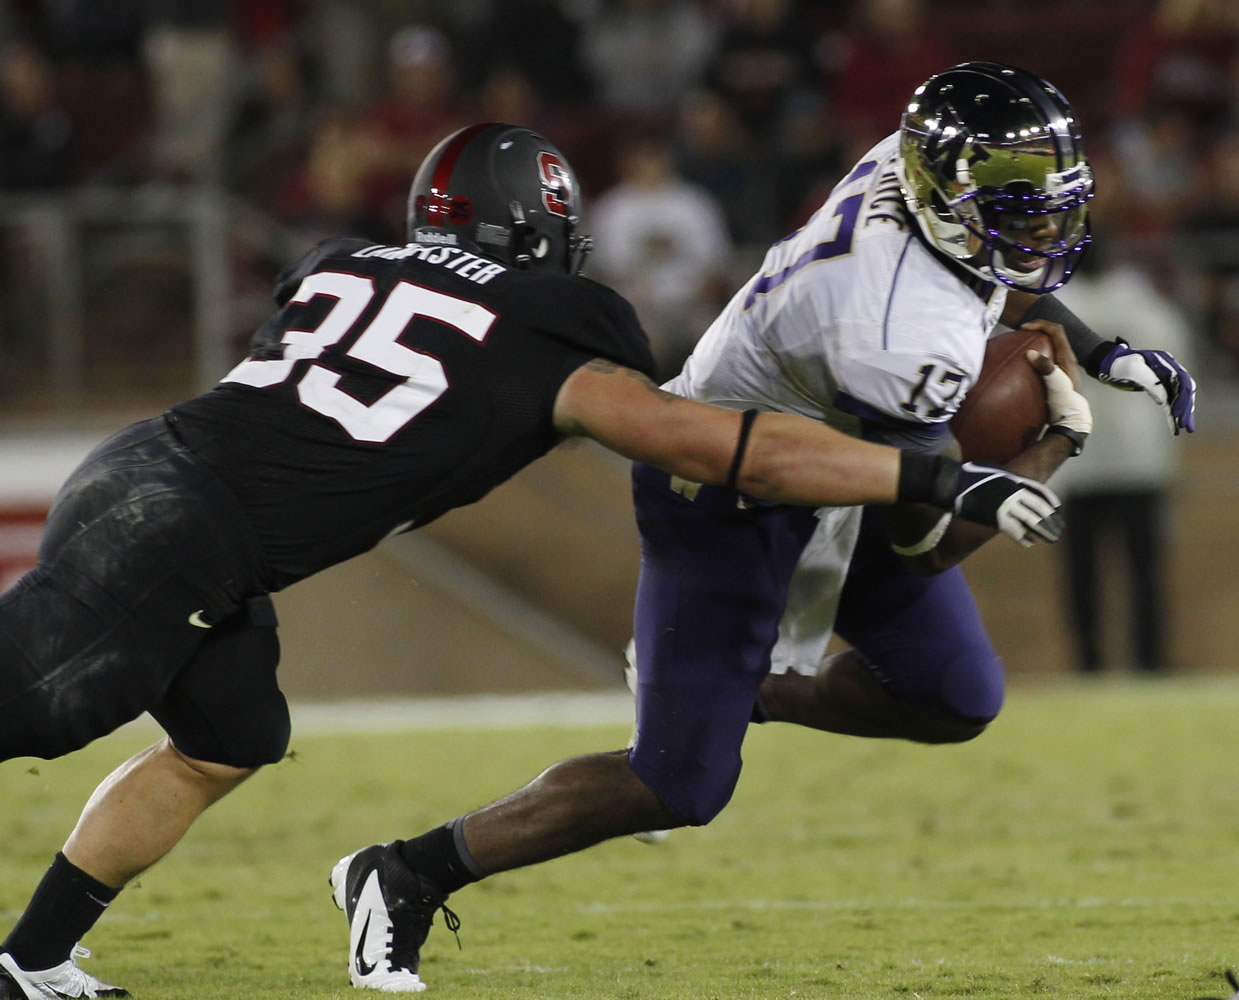 Washington quarterback Keith Price, right, is tackled by  Stanford's Jarek Lancaster during the second half of an NCAA college football game in Stanford, Calif., Saturday, Oct. 5, 2013.